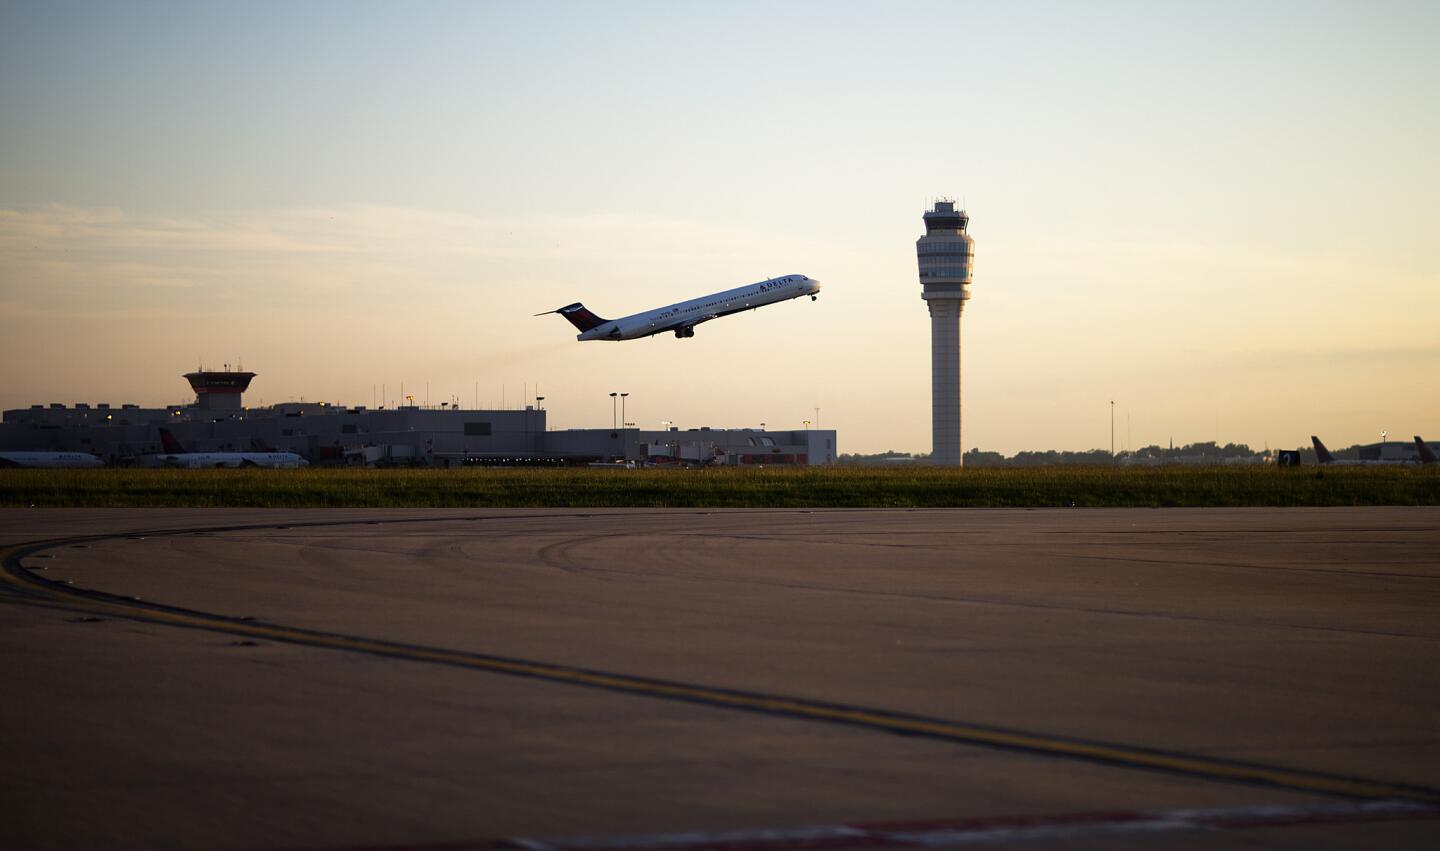 Hartsfield-Jackson Atlanta International Airport was the world's busiest airport for passenger traffic in 2014, a report says.